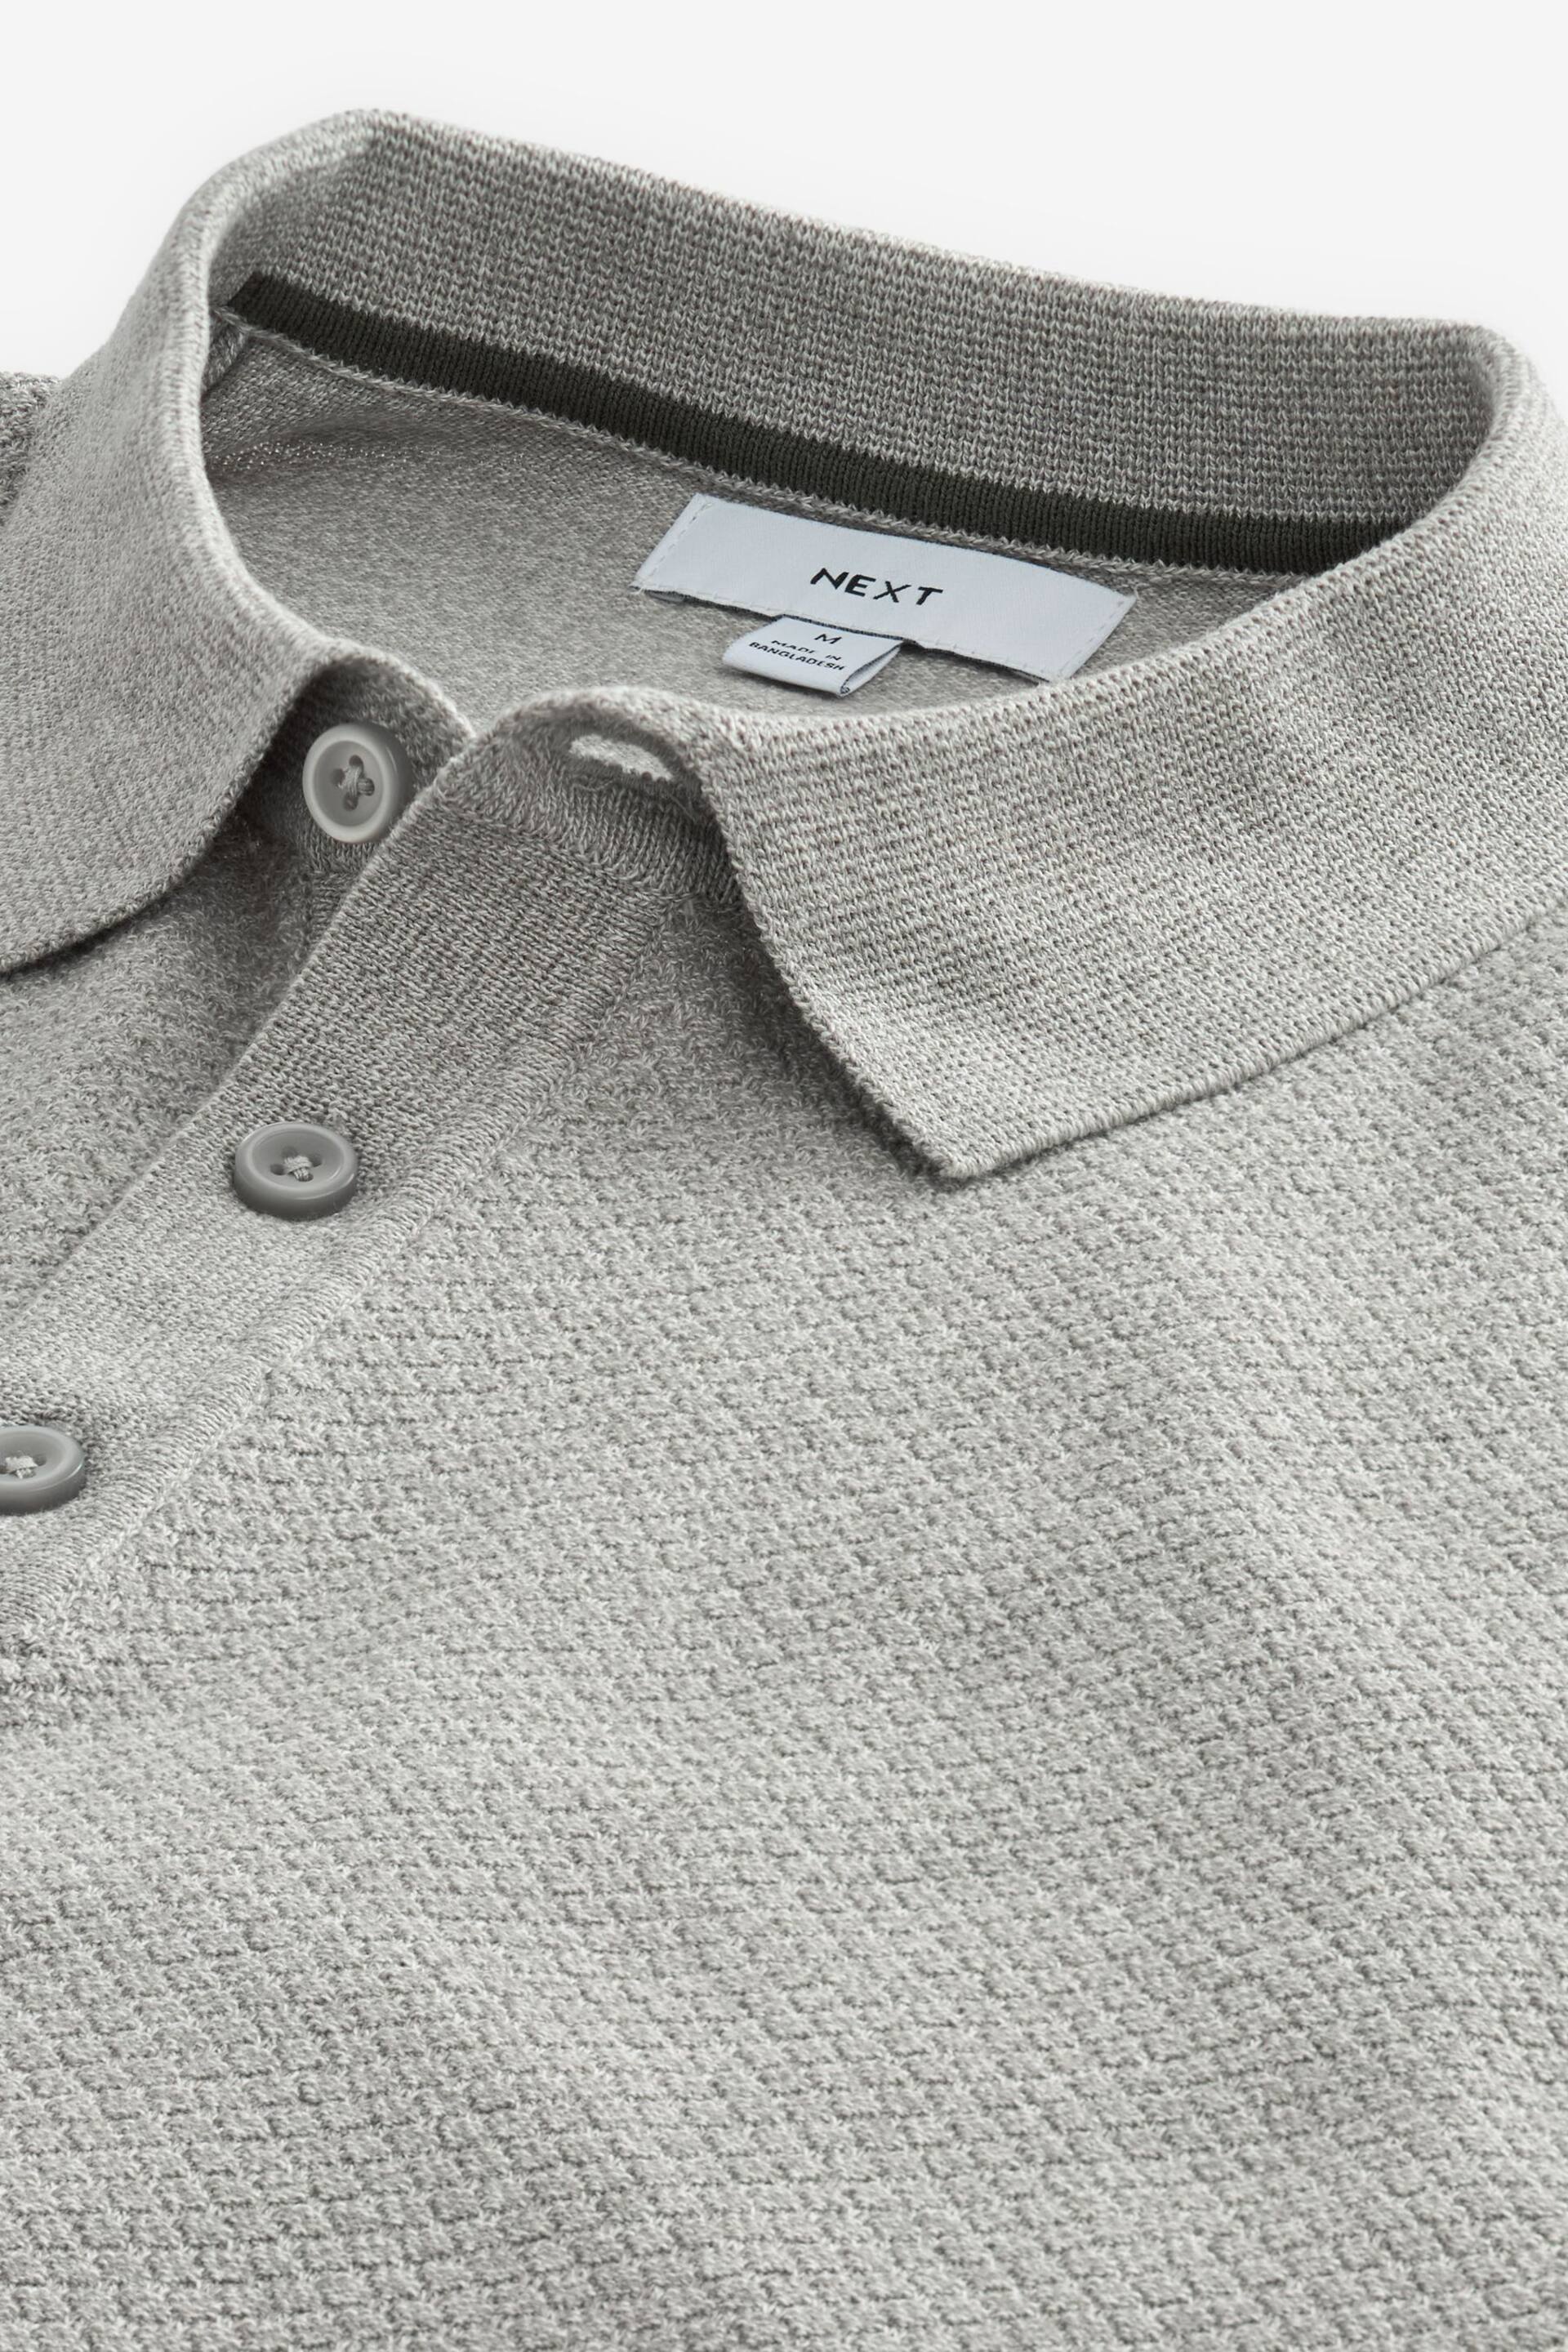 Grey Knitted Bubble Textured Regular Fit Polo Shirt - Image 6 of 7